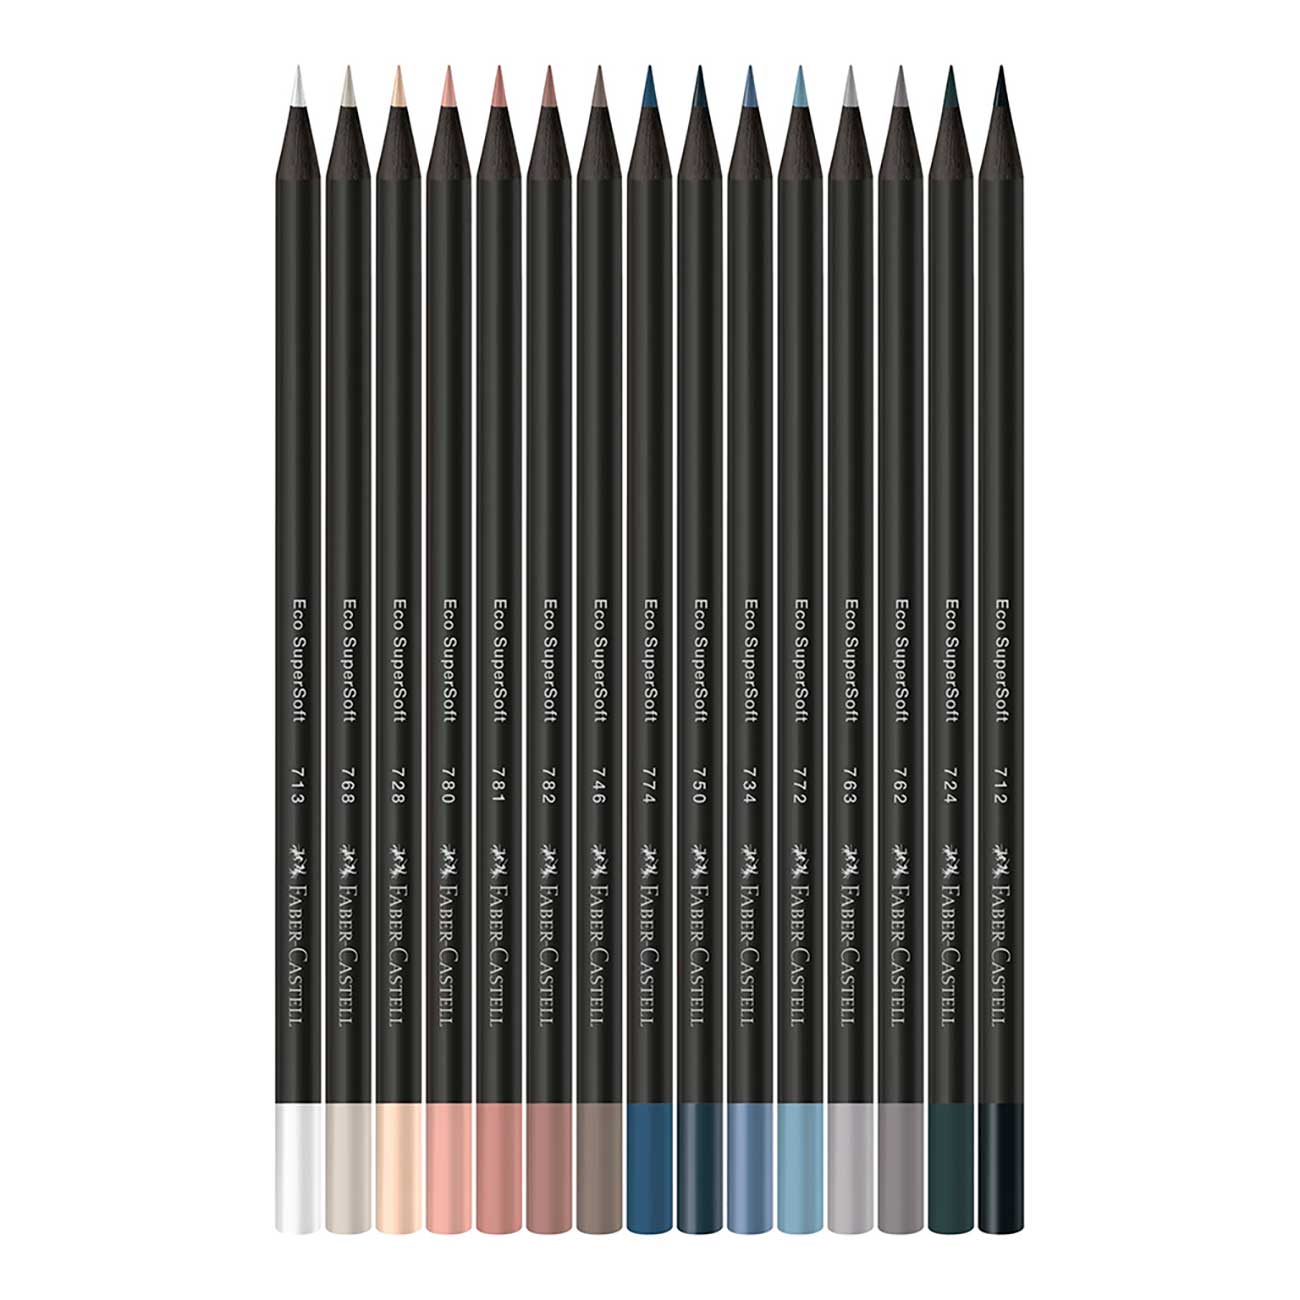 Ecolpis Faber-Castell Supersoft 15 Cores Neutras